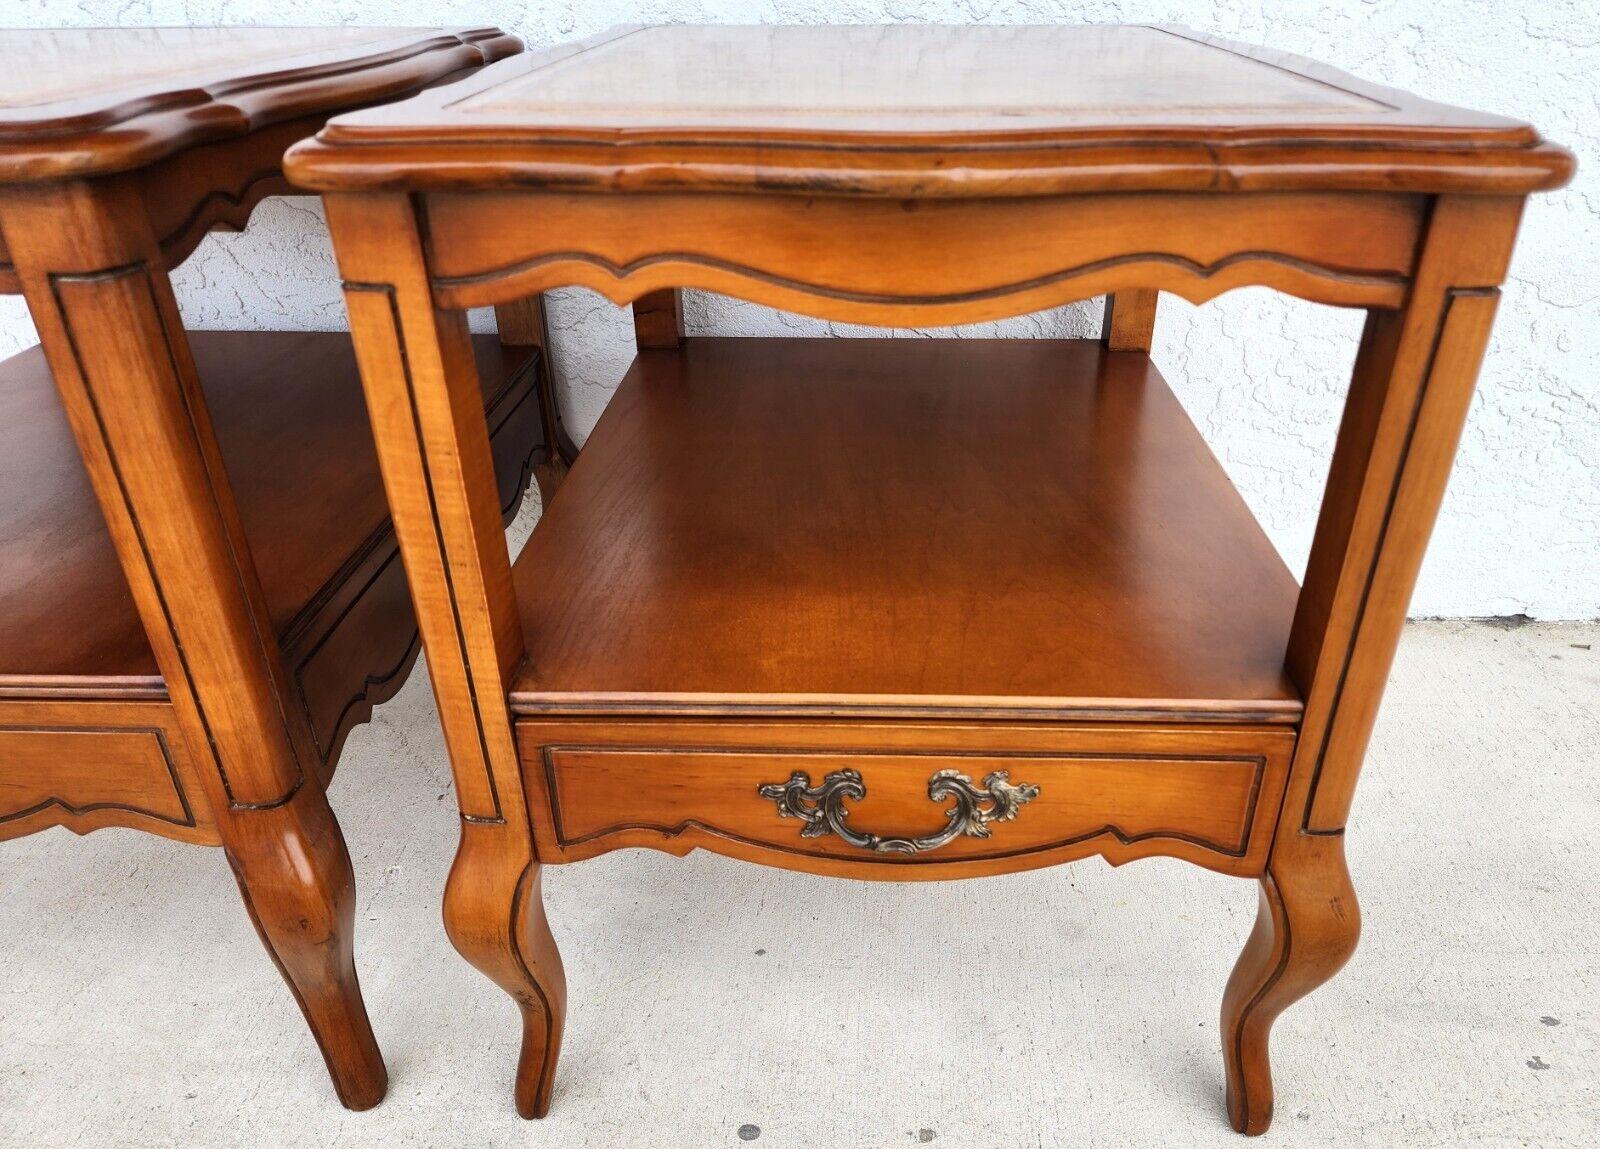 French Provincial Vintage French Side Tables Walnut Leather Top by HAMMARY For Sale